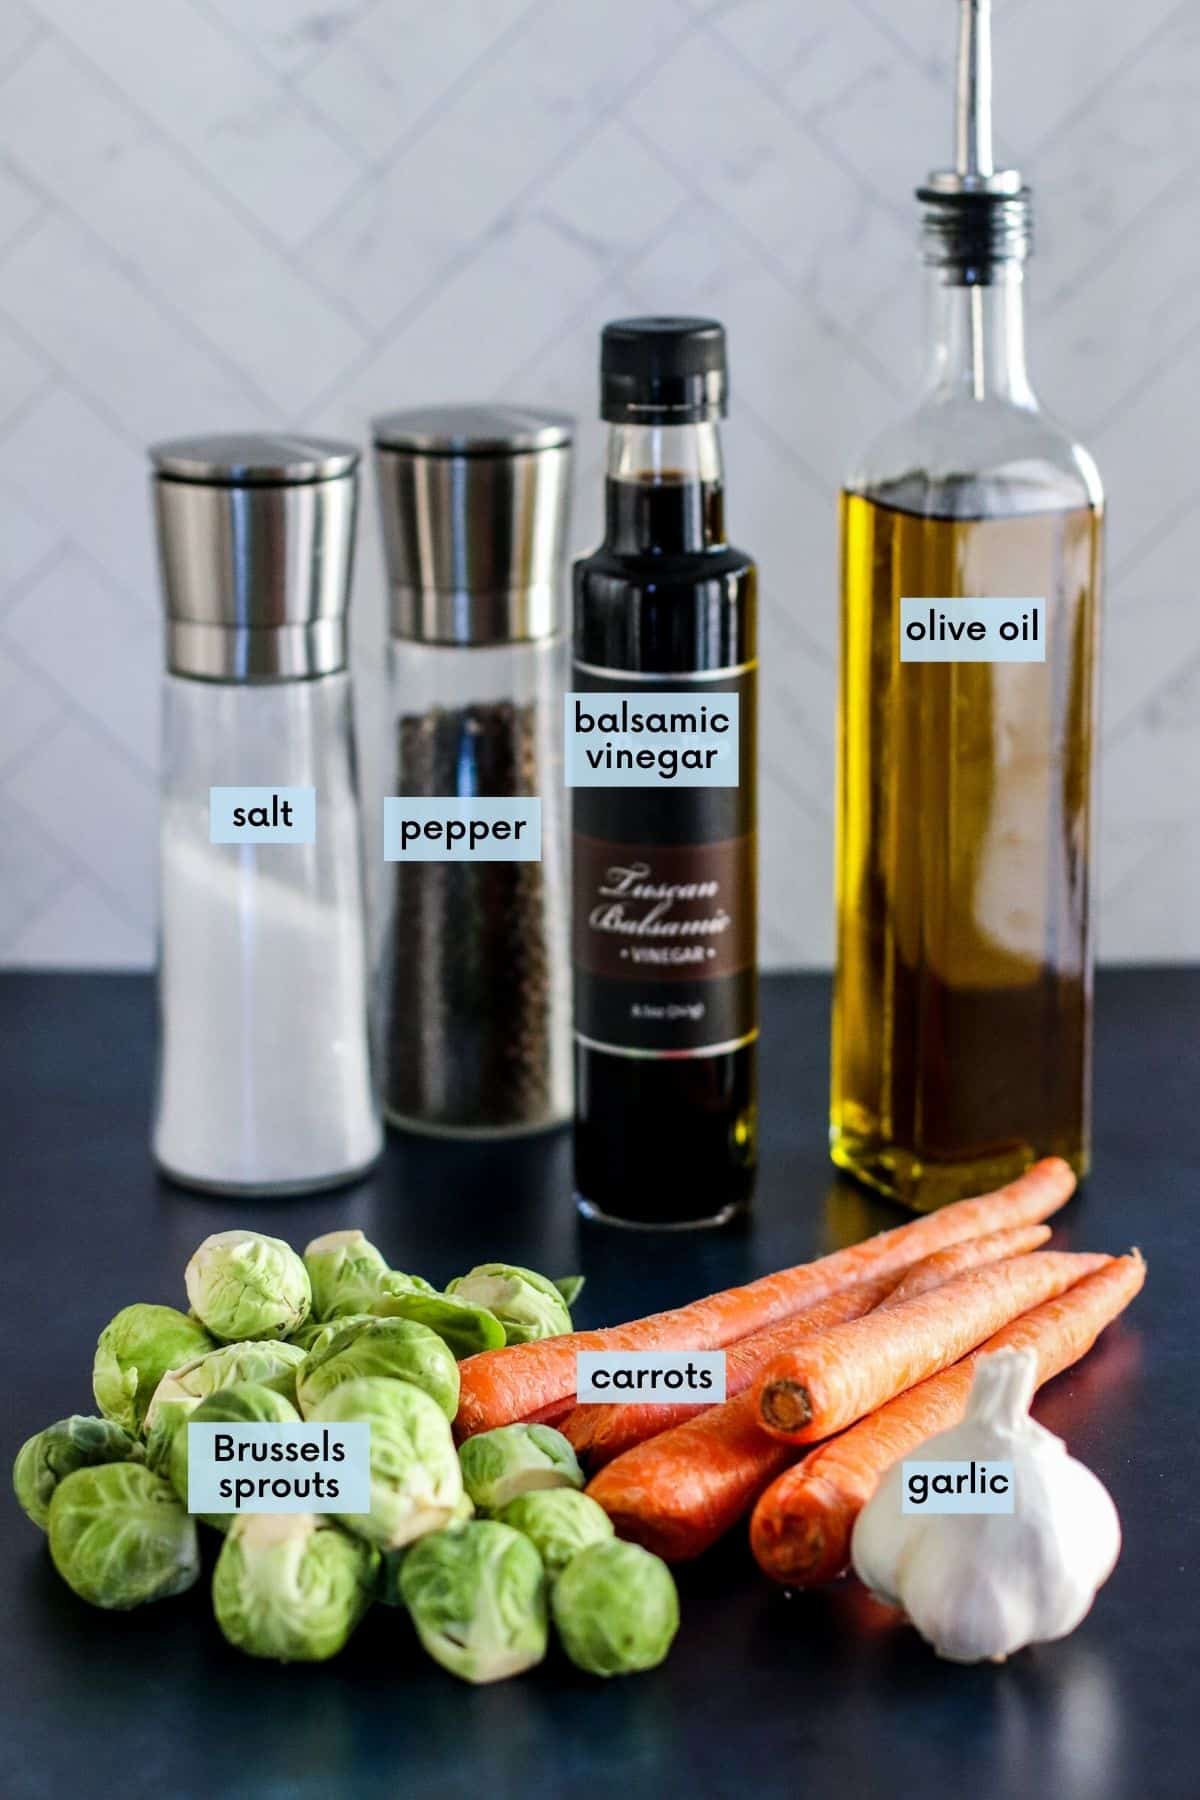 Labeled ingredients needed to make this recipe: Brussels sprouts, carrots, garlic, olive oil, balsamic vinegar, salt and pepper.